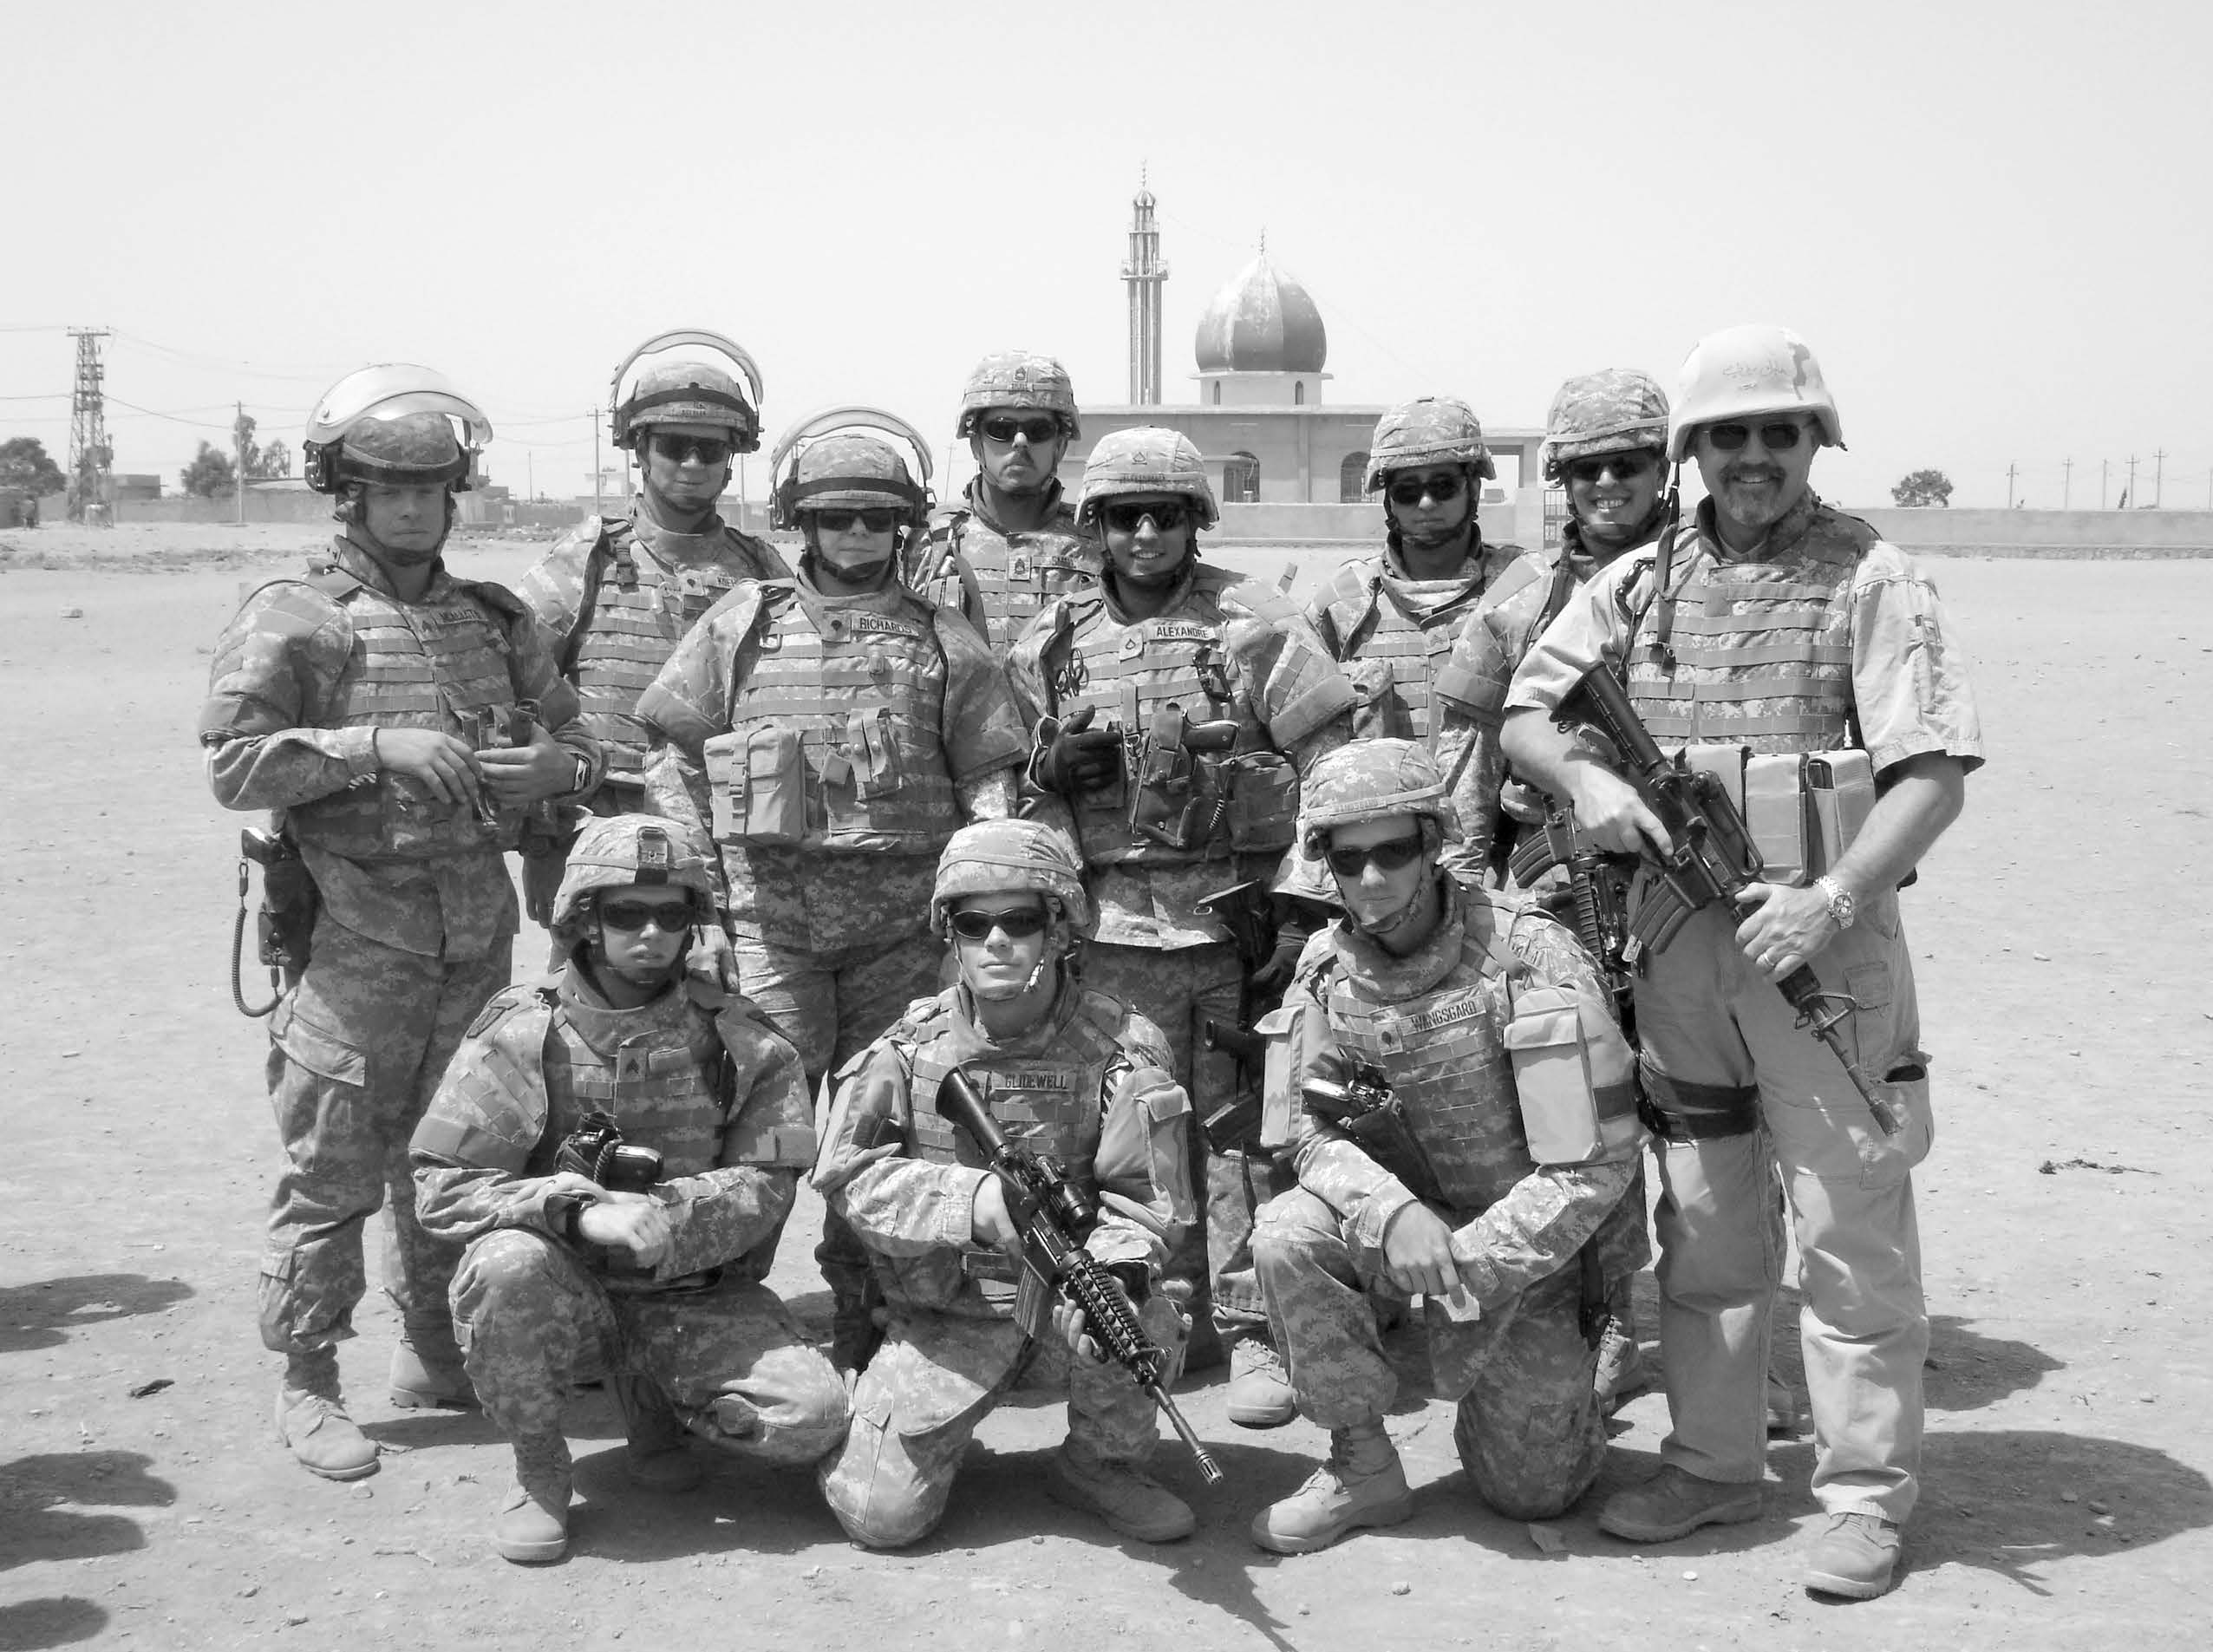 This picture, taken in summer 2006, shows Michael Beesley’s military police squad from the 511th Military Police, deployed from Fort Drum, New York, to Tal-Afar, Afghanistan. Courtesy of Marilynn Beesley.